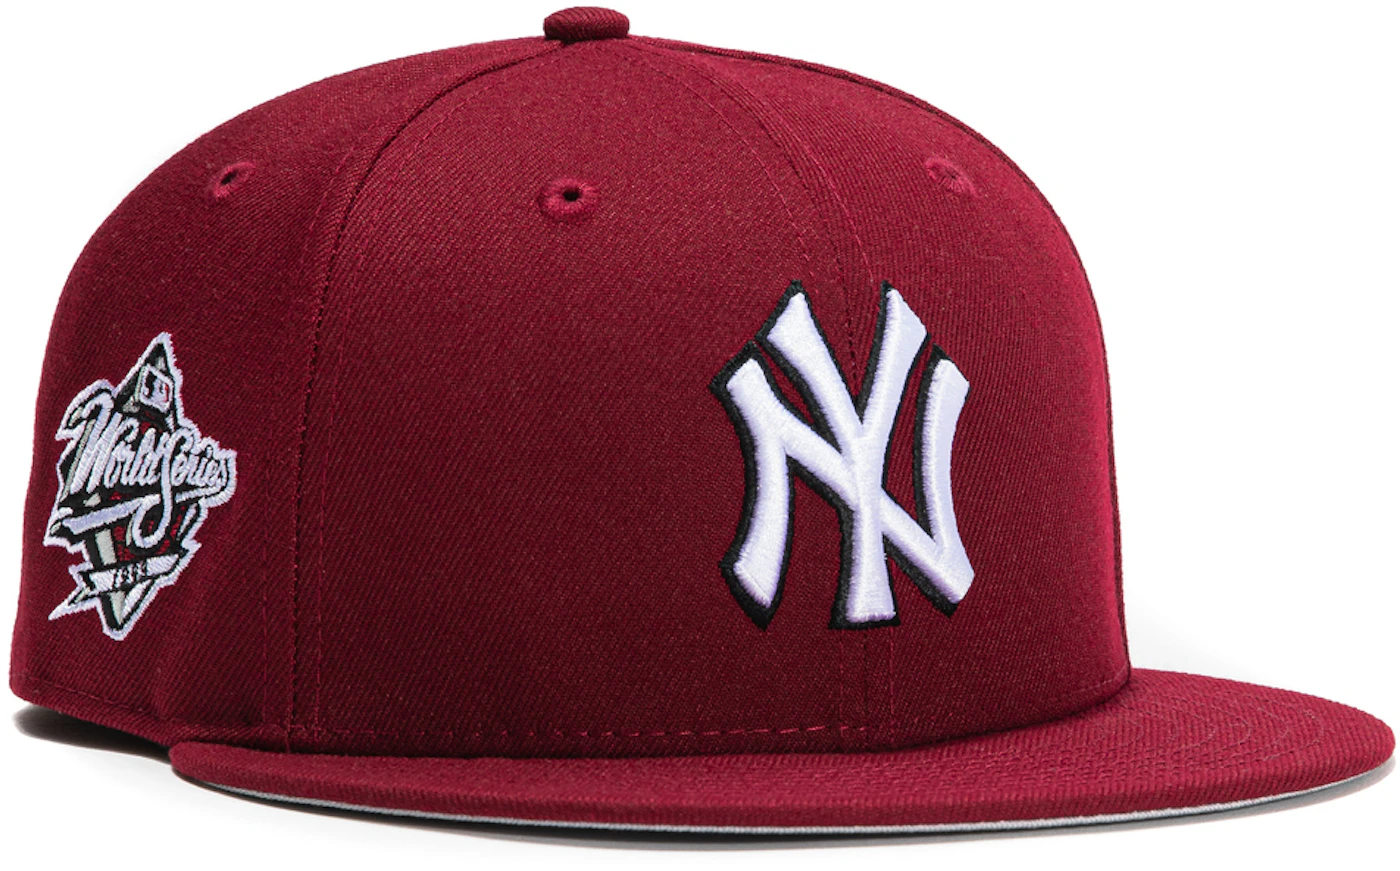 New Era New York Yankees Aux Pack Vol 2 1999 World Series Patch Hat Club Exclusive 59FIFTY Fitted Hat Cardinal/White